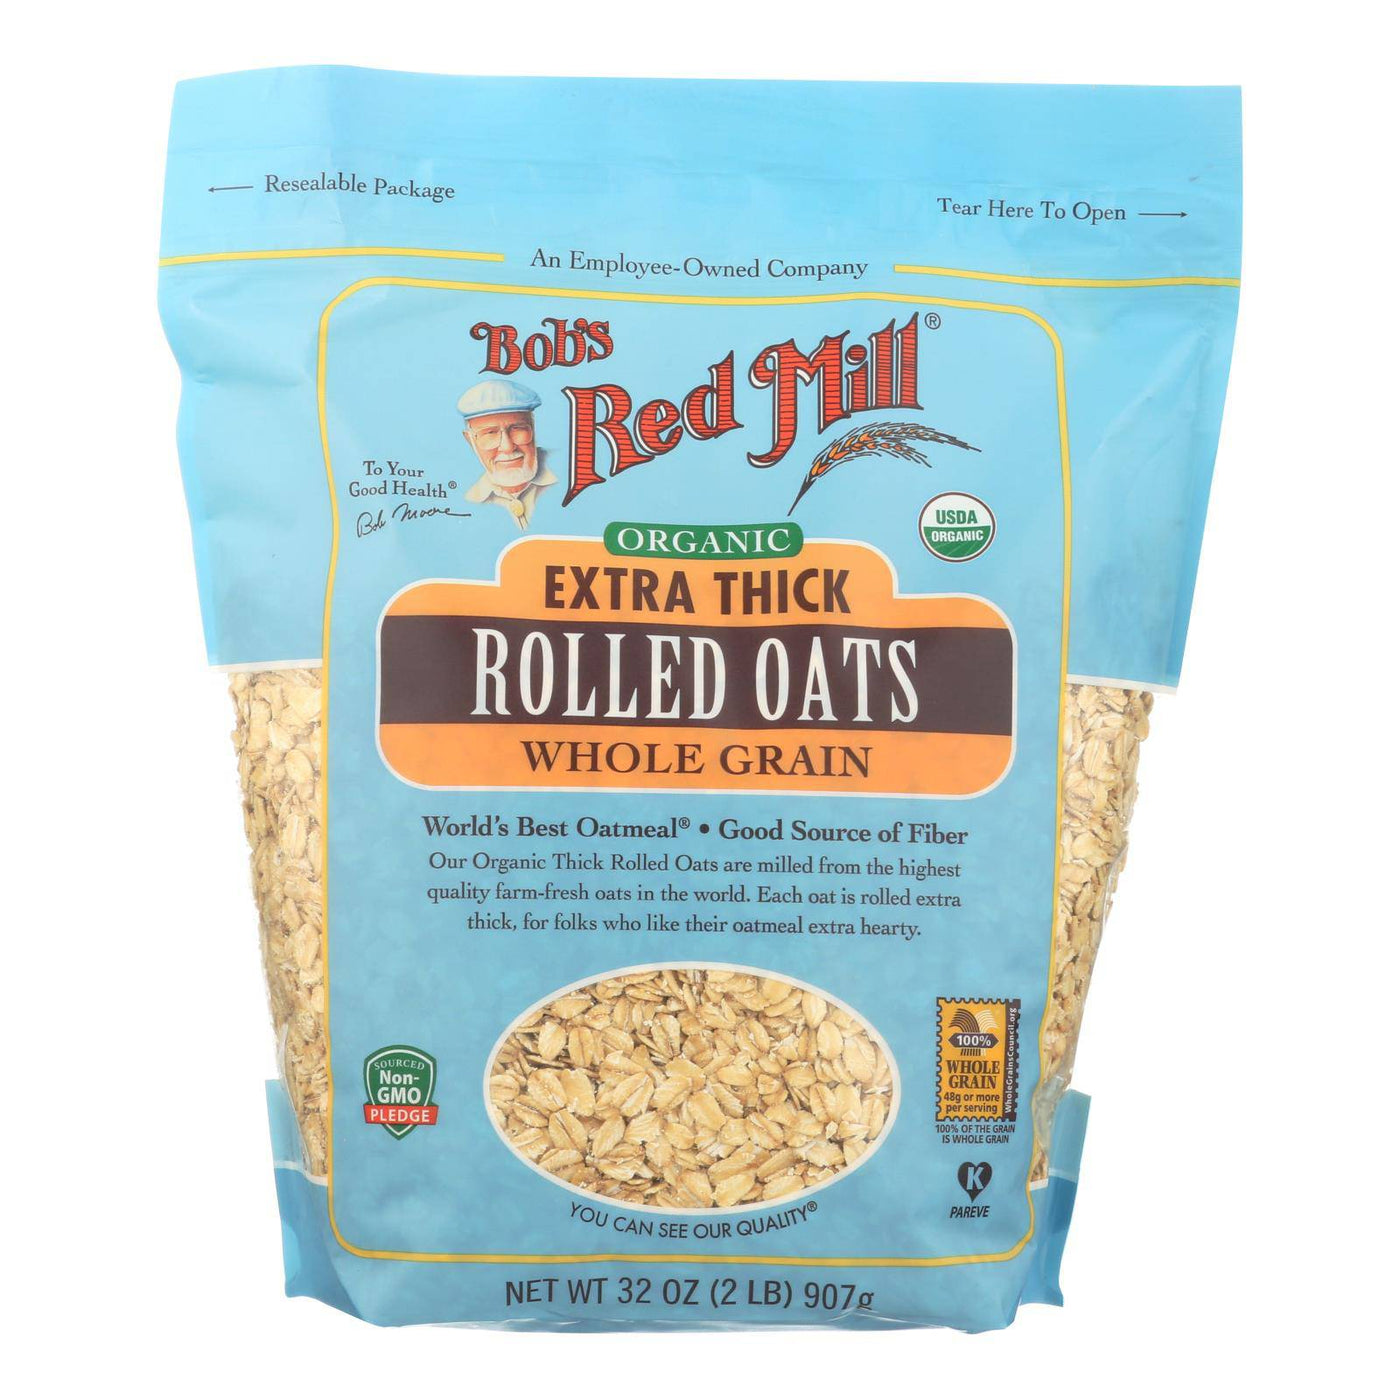 Bob's Red Mill - Oats - Organic Extra Thick Rolled Oats - Whole Grain - Case Of 4 - 32 Oz. | OnlyNaturals.us